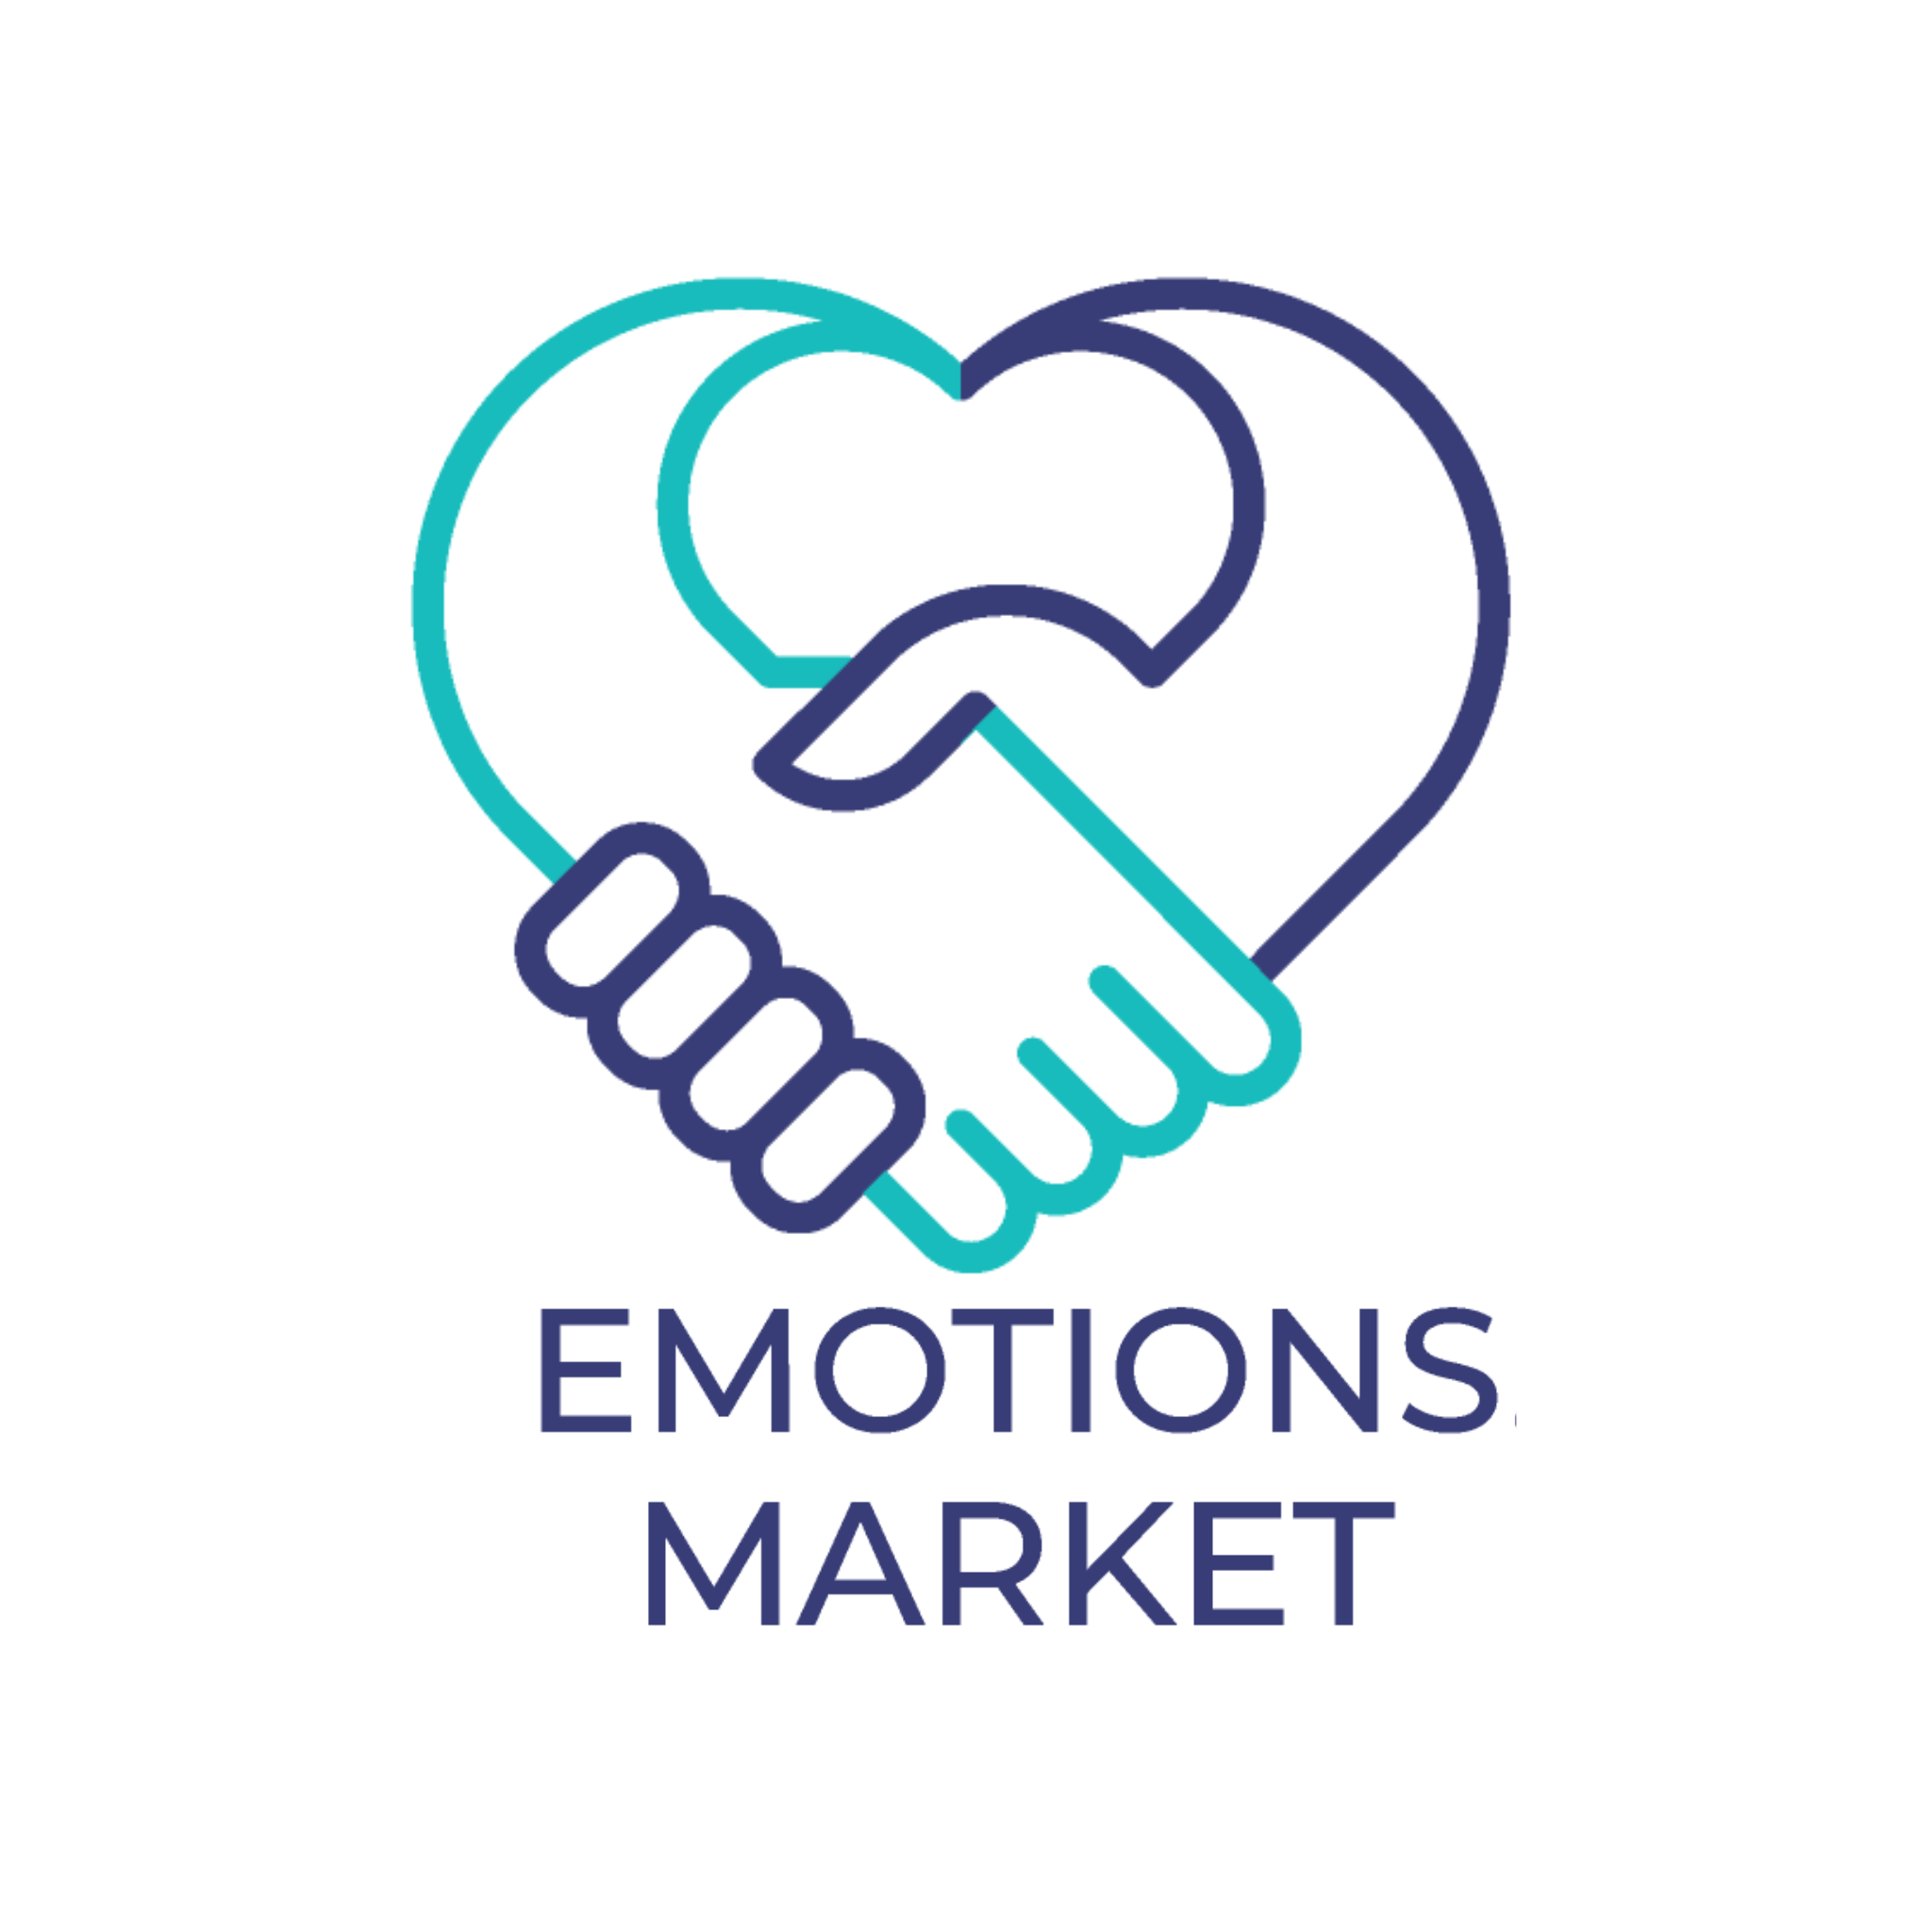 Emotions Market – a classified ad board for multisensory and emotion-provoking experiences